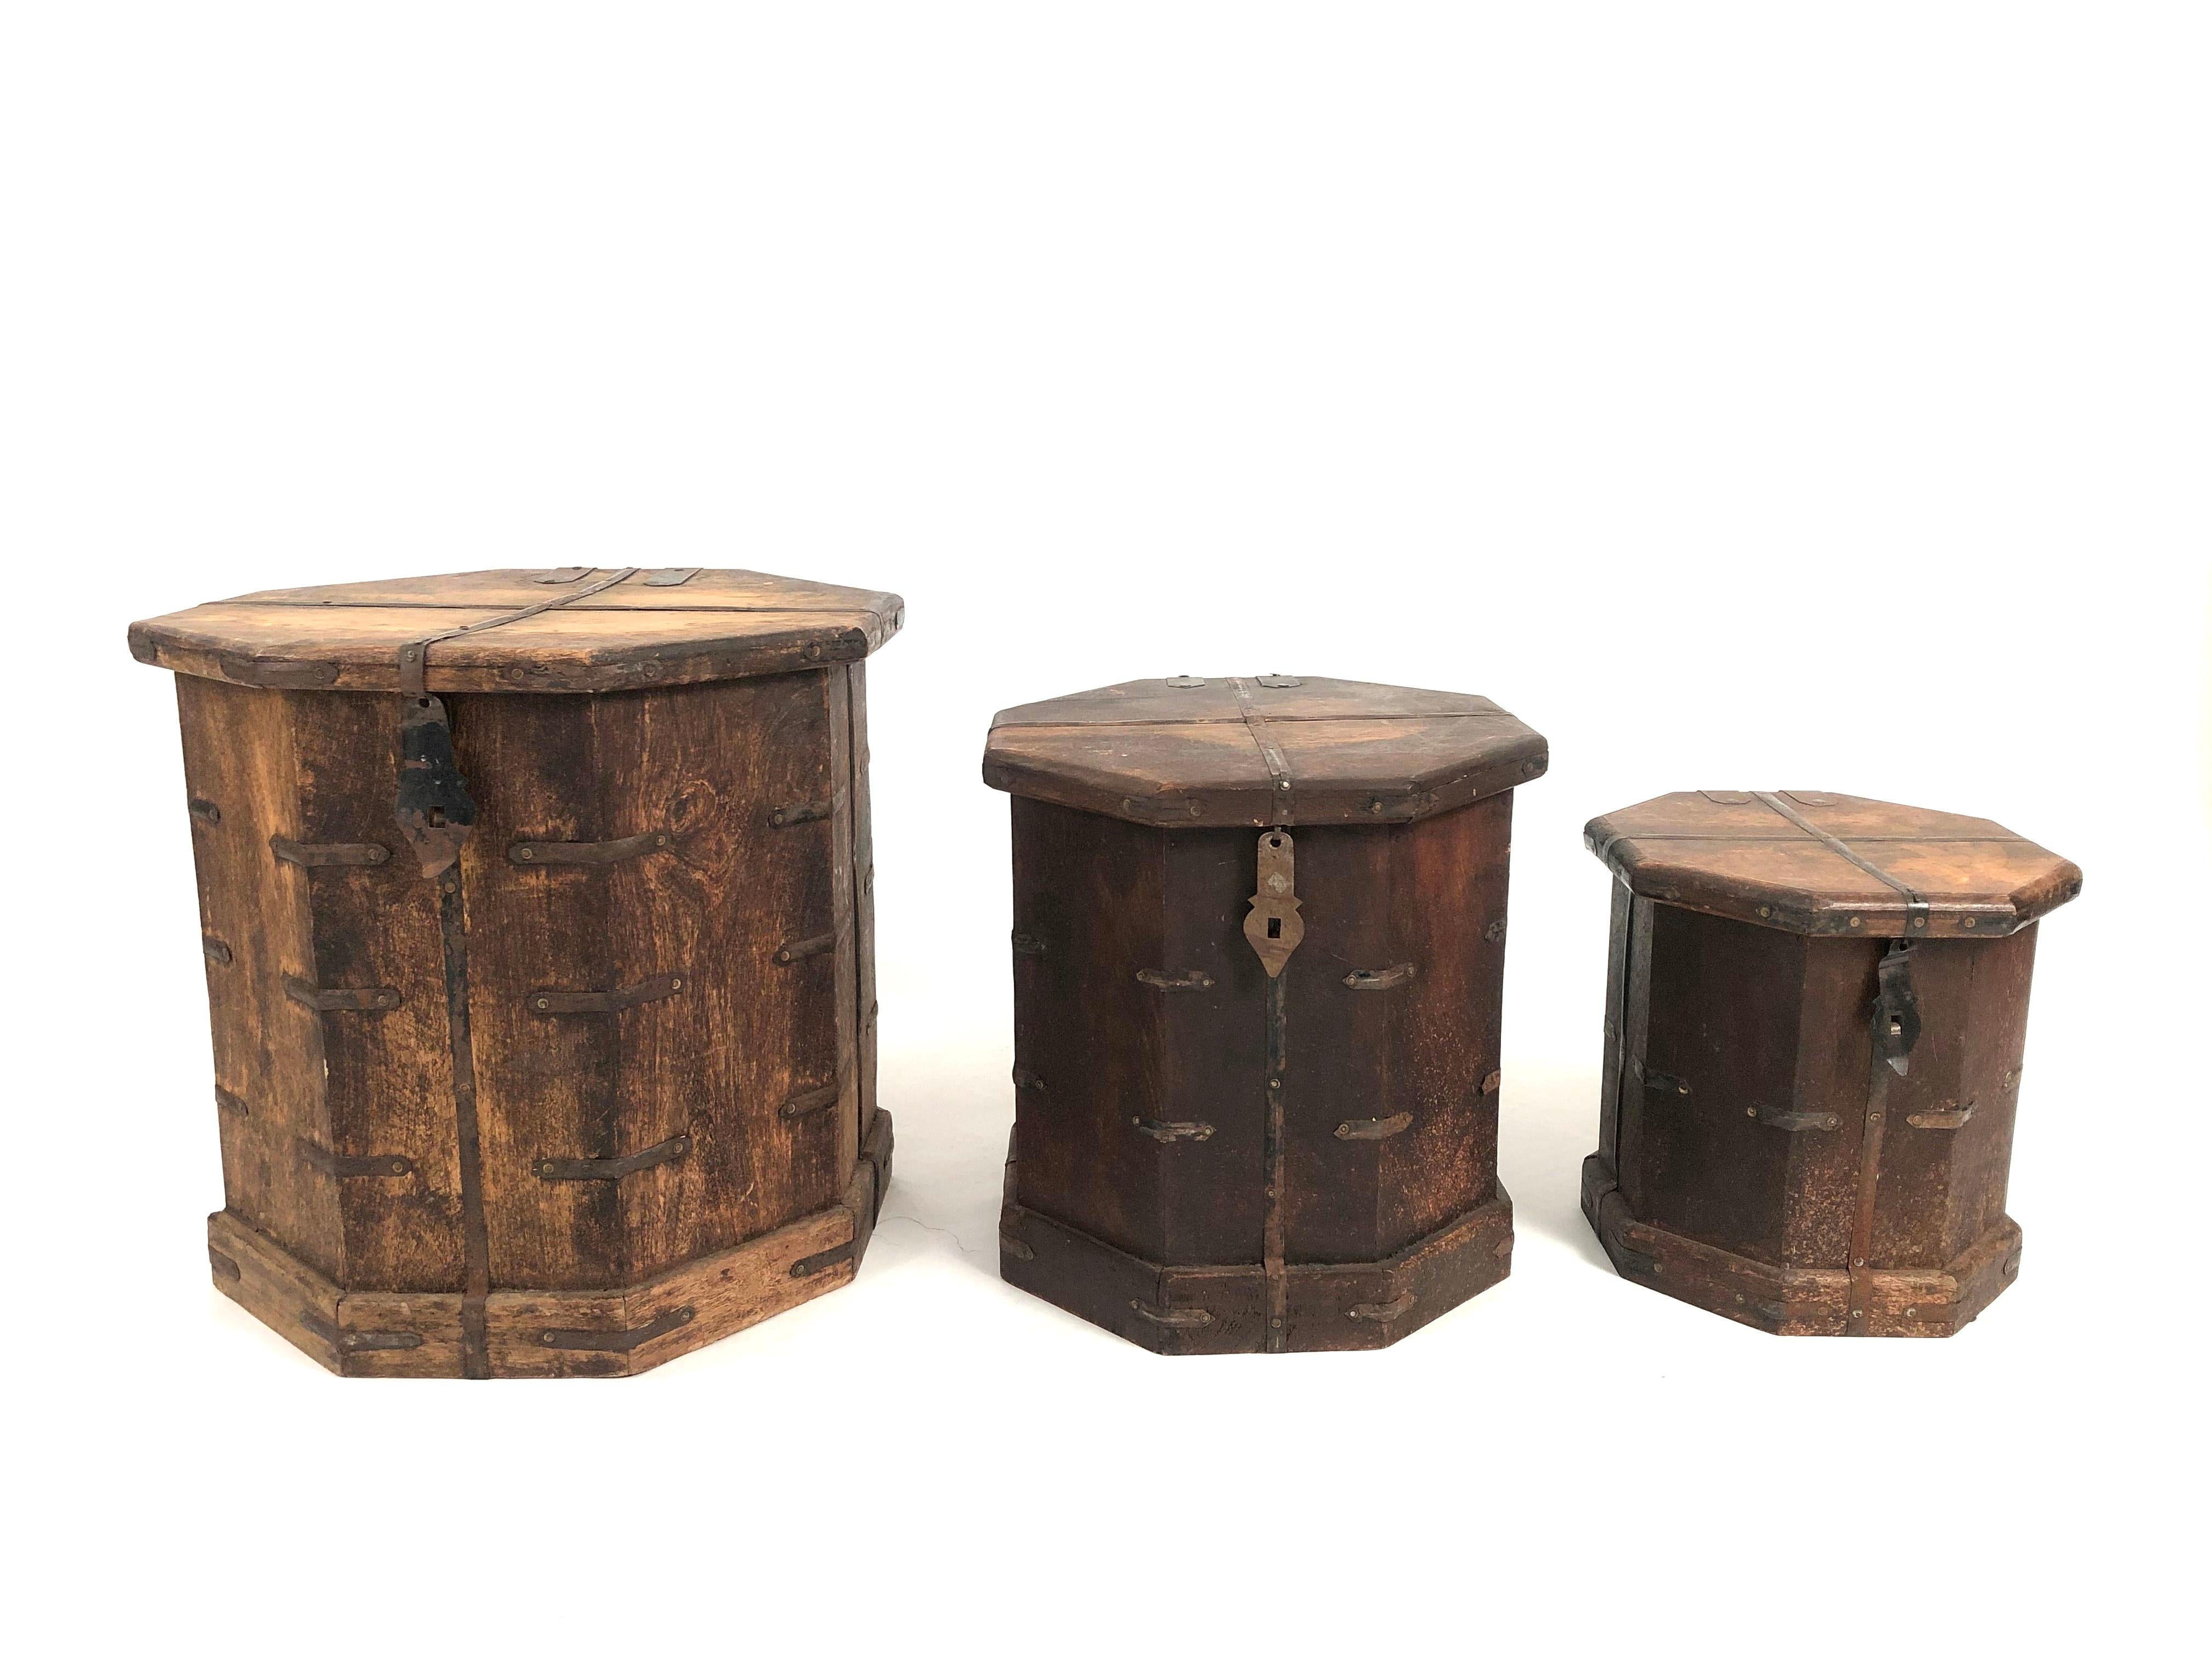 A set of 3 vintage Asian octagonal hardwood nesting boxes with metal strapwork which work beautifully individually or as a group of occasional tables, providing handy storage inside of each. The 3 tables nest comfortably, one inside the other.